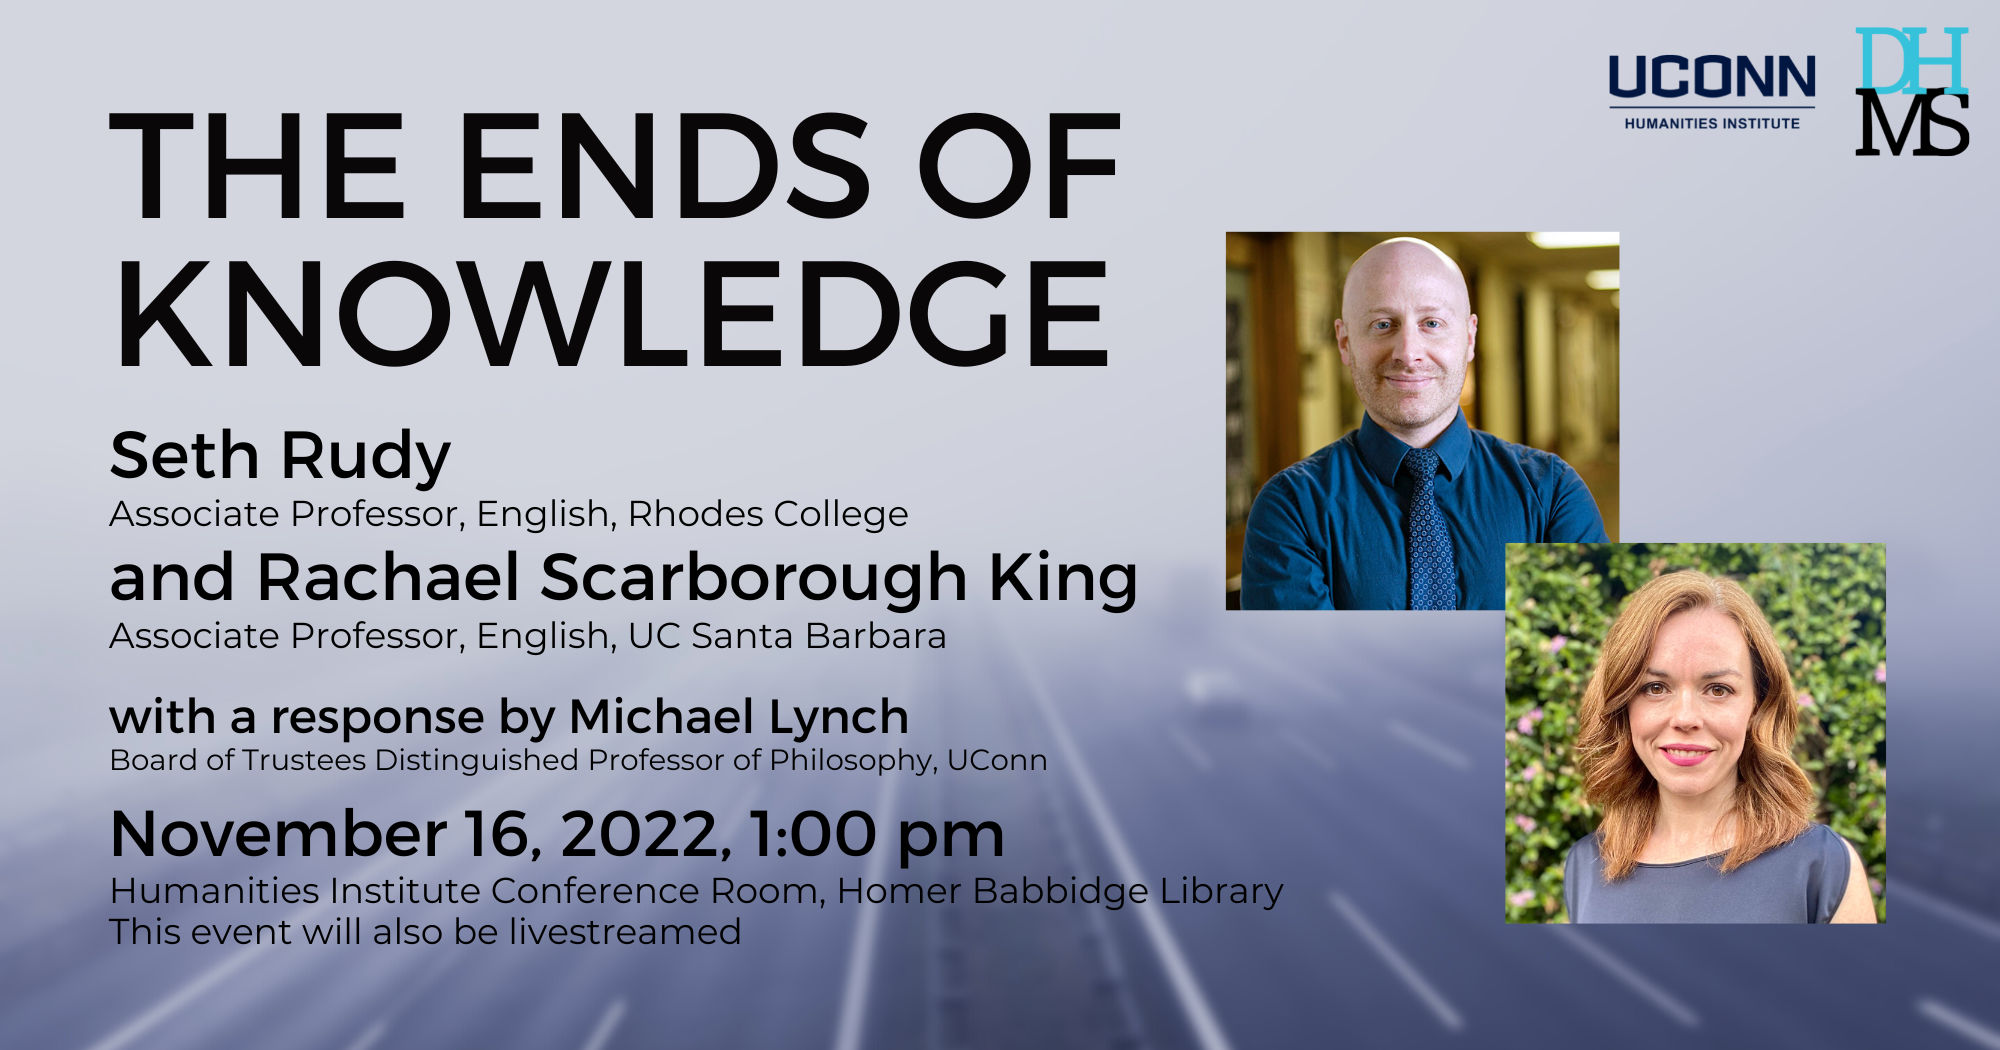 The Ends of Knowledge. Seth Rudy and Rachael Scarborough King, with a response from Michael Lynch. November 16, 2022, 1:00pm. UConn Humanities Institute Conference Room. This even will also be livestreamed.